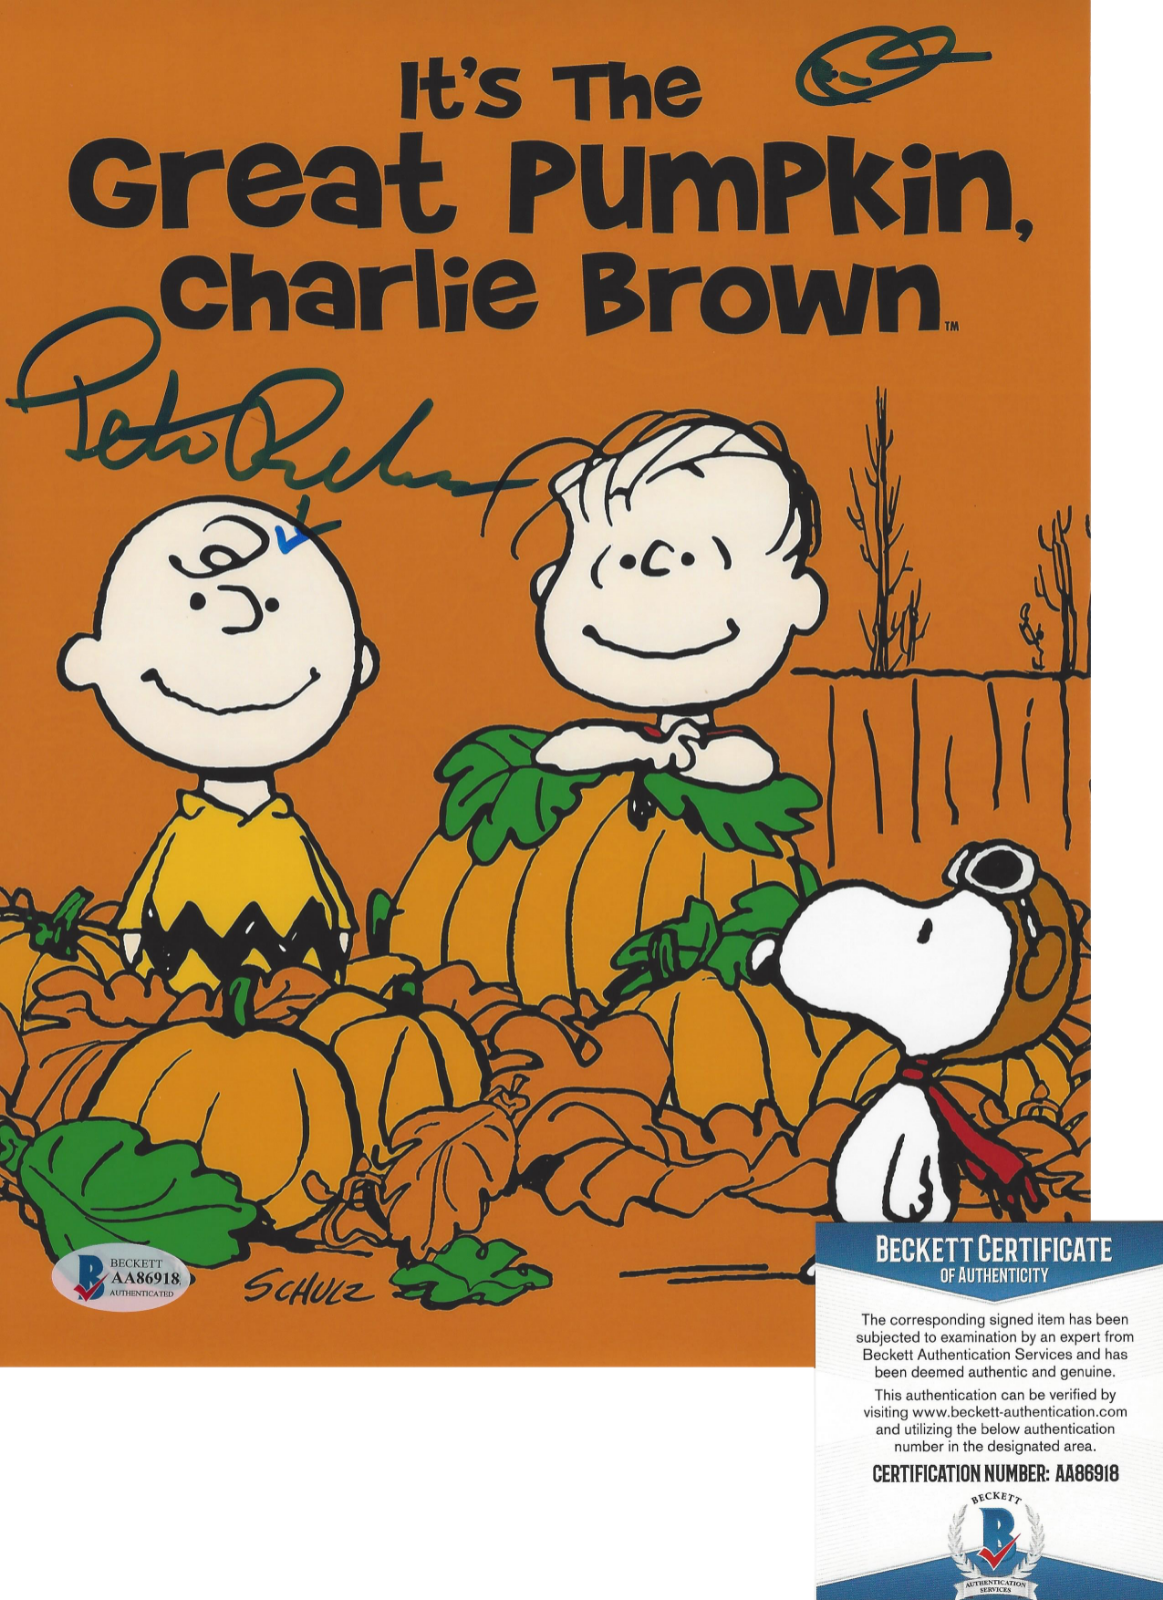 PETER ROBBINS PEANUTS VOICE OF CHARLIE BROWN SIGNED 8x10 Photo Poster painting O BECKETT COA BAS